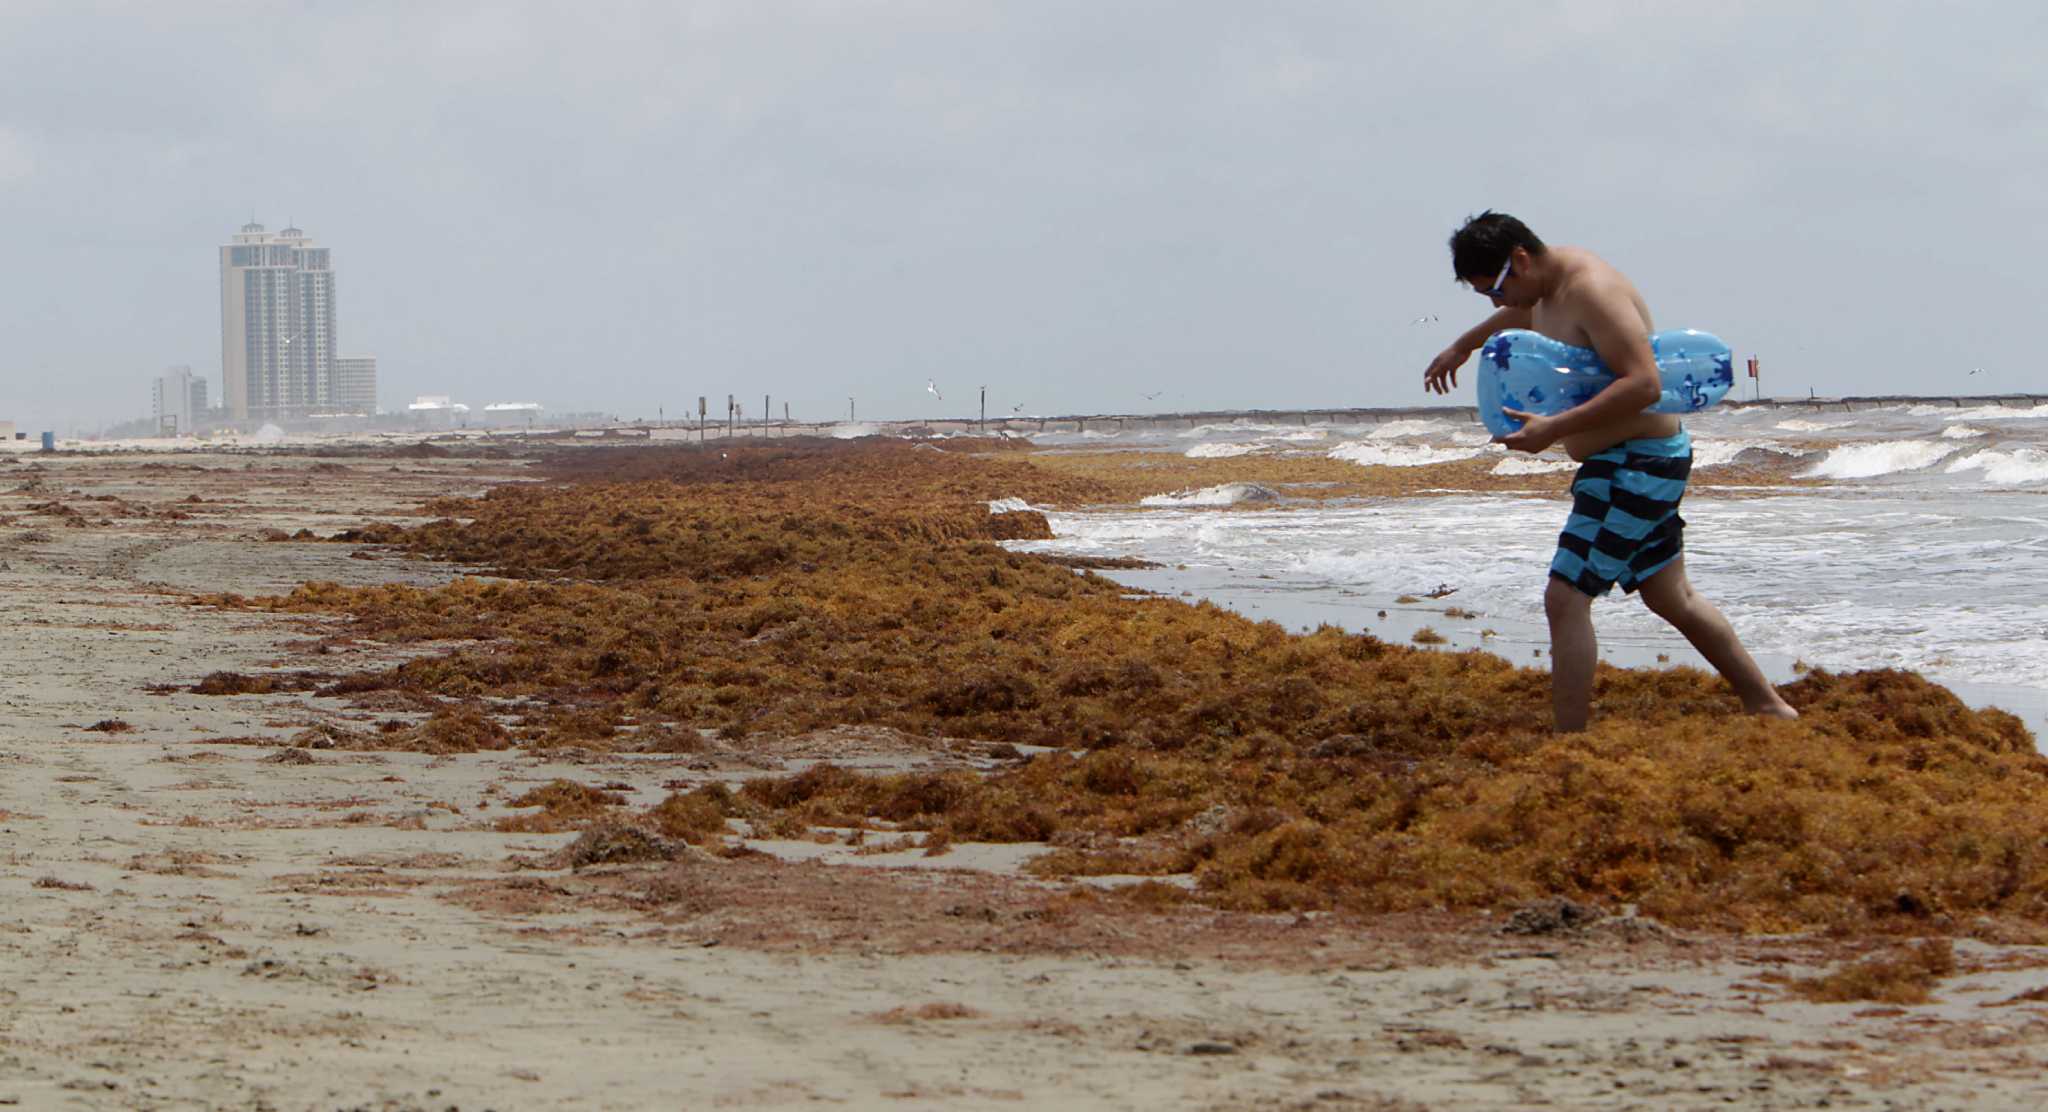 Tourists grumble as Galveston seaweed clean-up continues - Houston Chronicle2048 x 1112